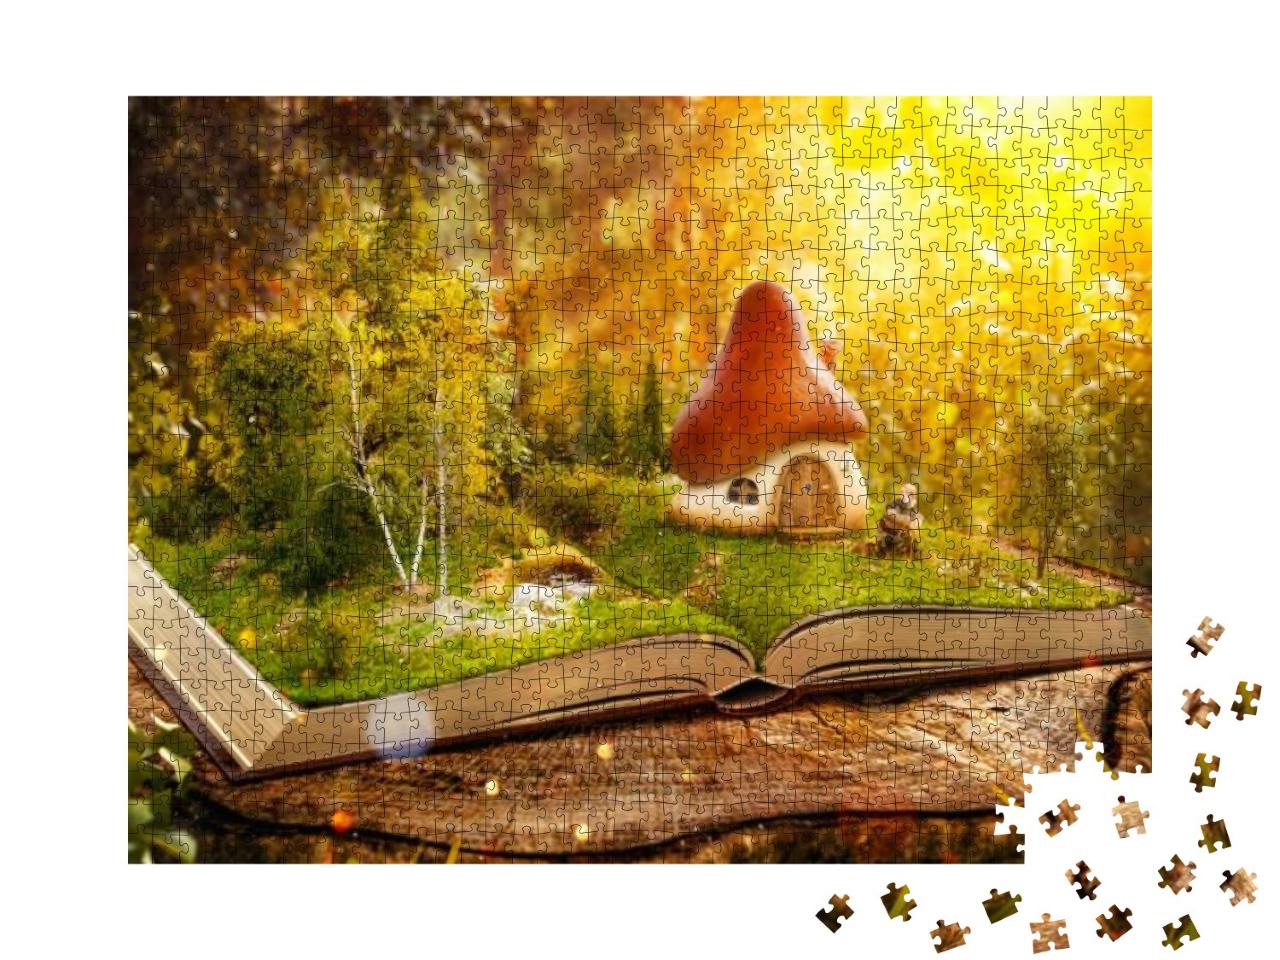 Magical Cartoon Mushroom House on Pages of Opened Book in... Jigsaw Puzzle with 1000 pieces